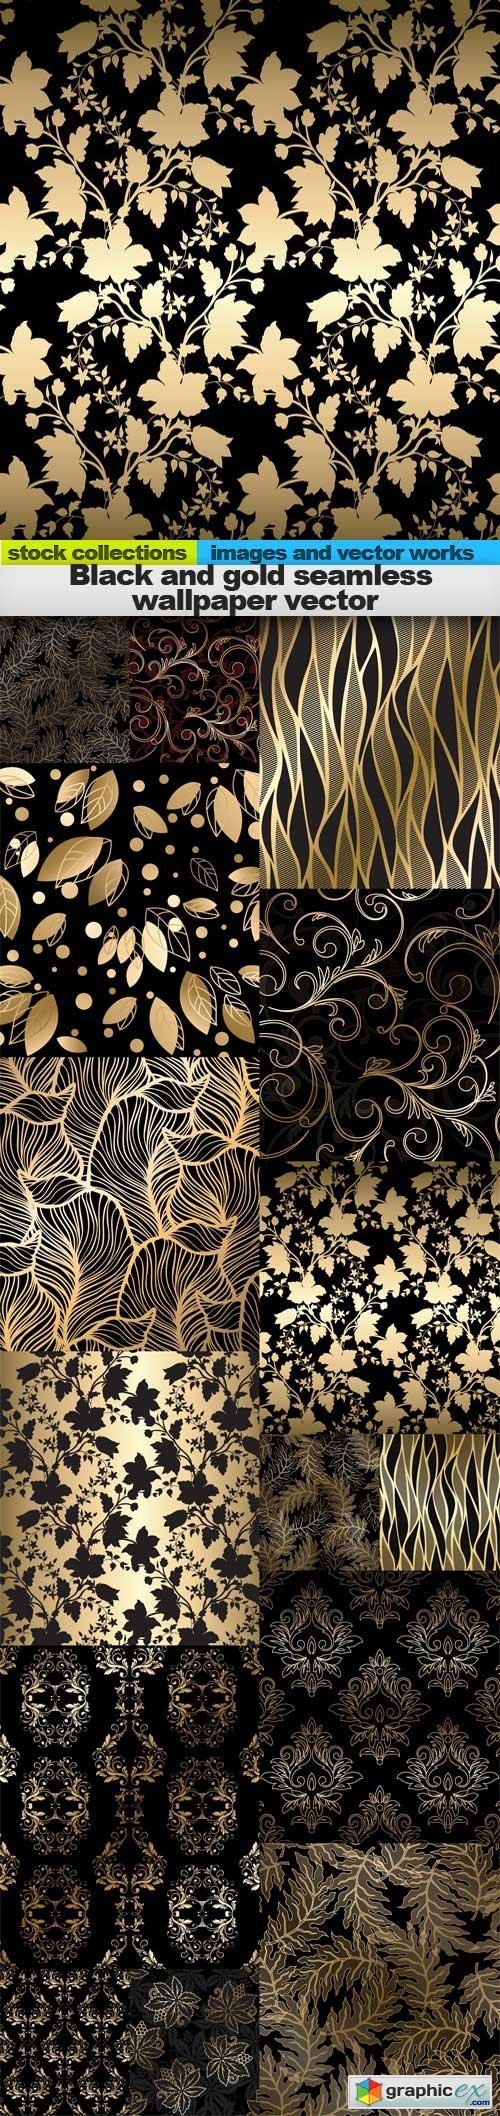 Black and gold seamless wallpaper vector, 15 x EPS